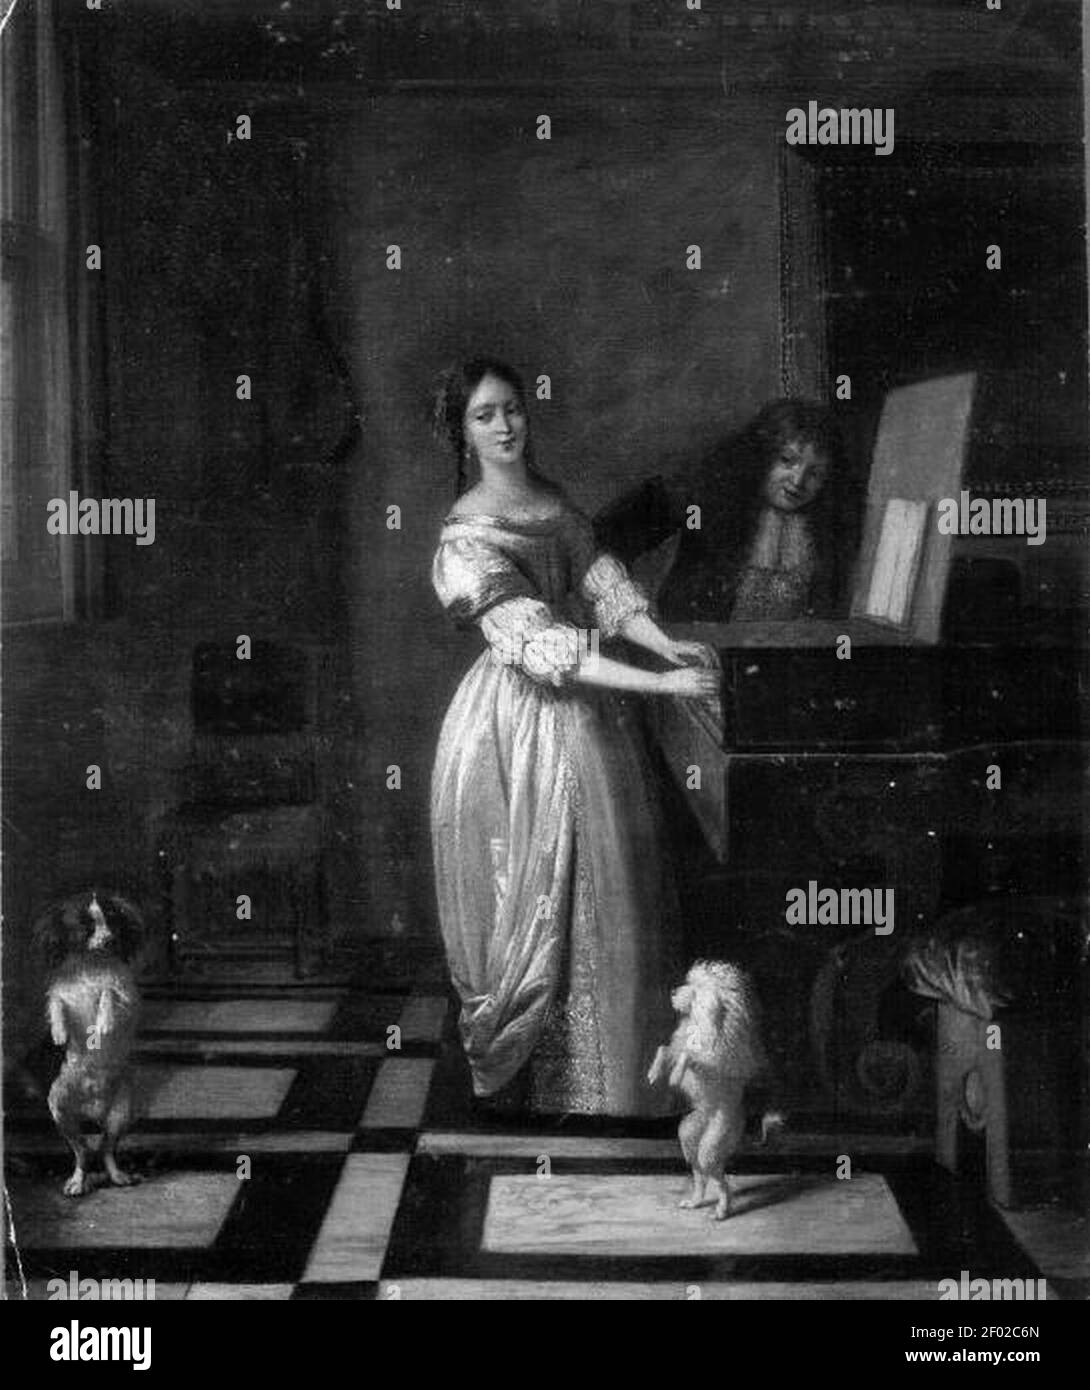 Pieter de Hooch - Woman playing the virginal with a man and two dancing dogs. Stock Photo